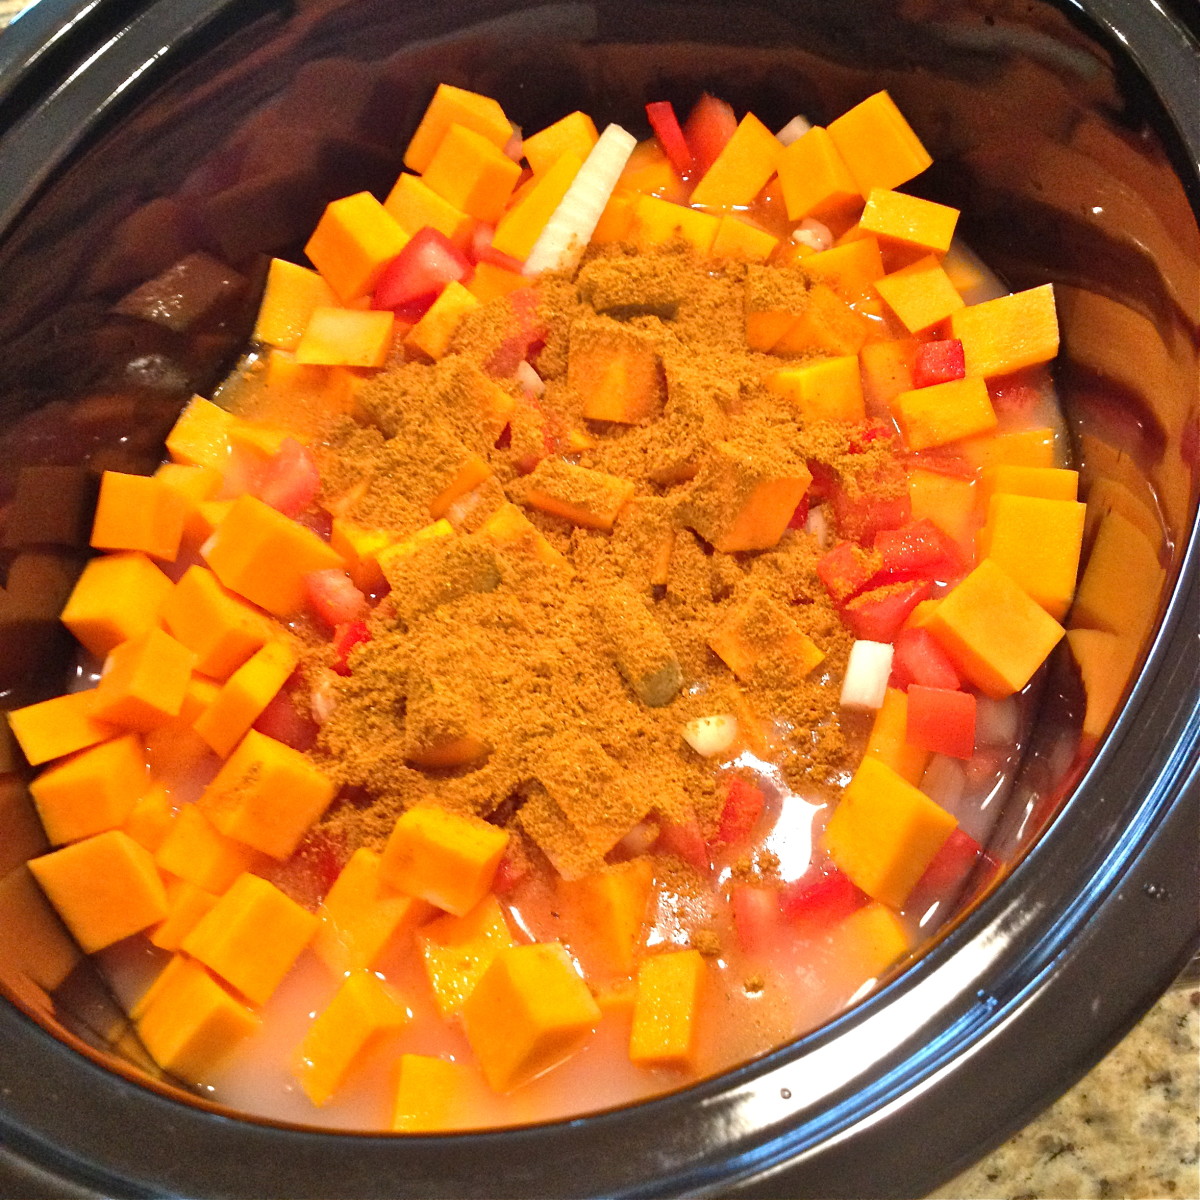 Add chopped vegetables, coconut milk, vegetable broth, curry powder and turmeric to slow cooker.